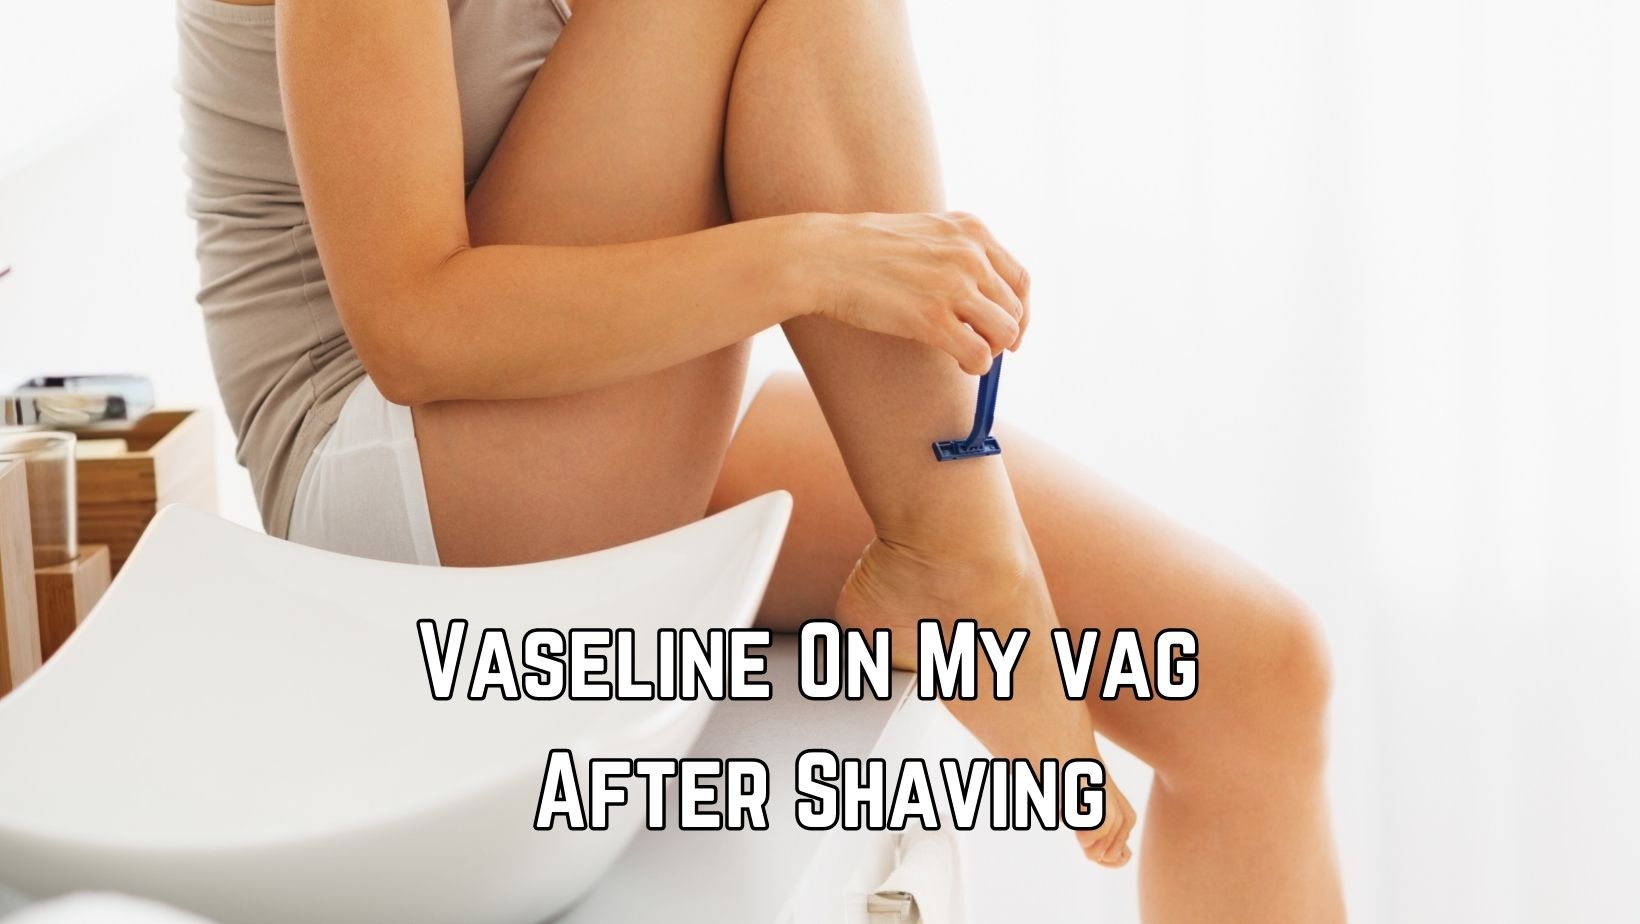 Can I Put Vaseline On My Private Area After Shaving